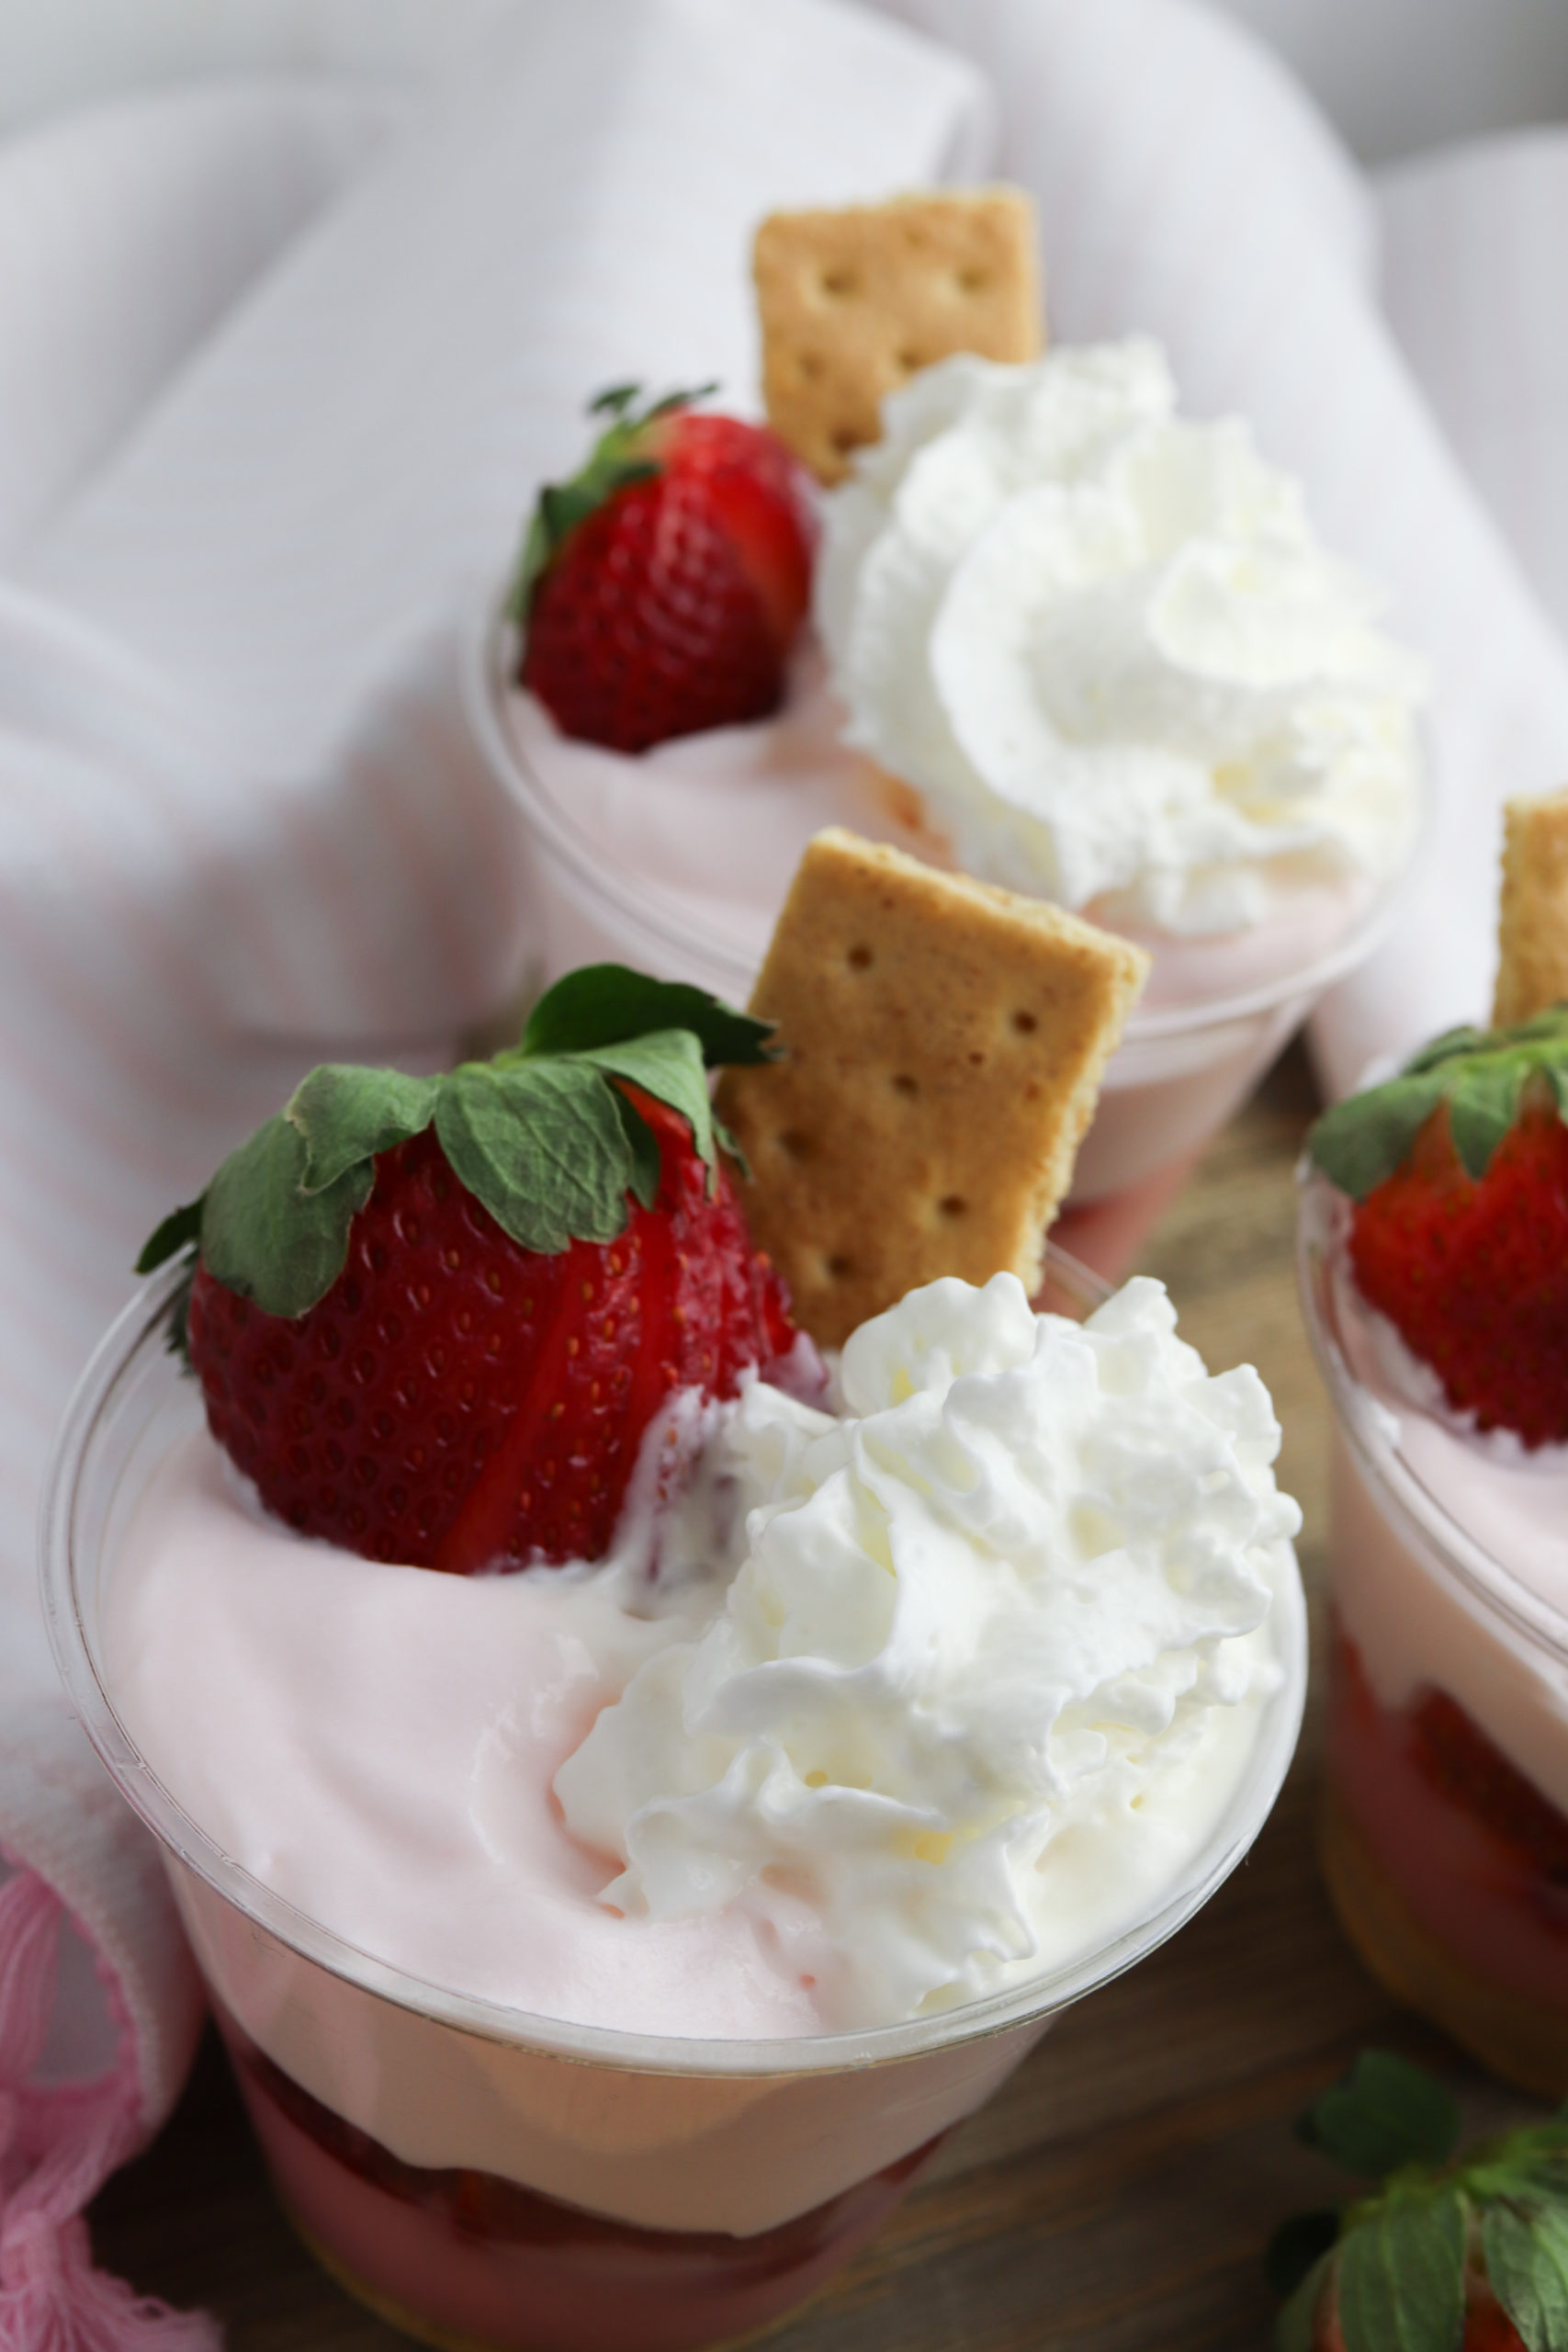 Strawberry Pudding Parfaits with whipped cream, a cookie and strawberry garnish.